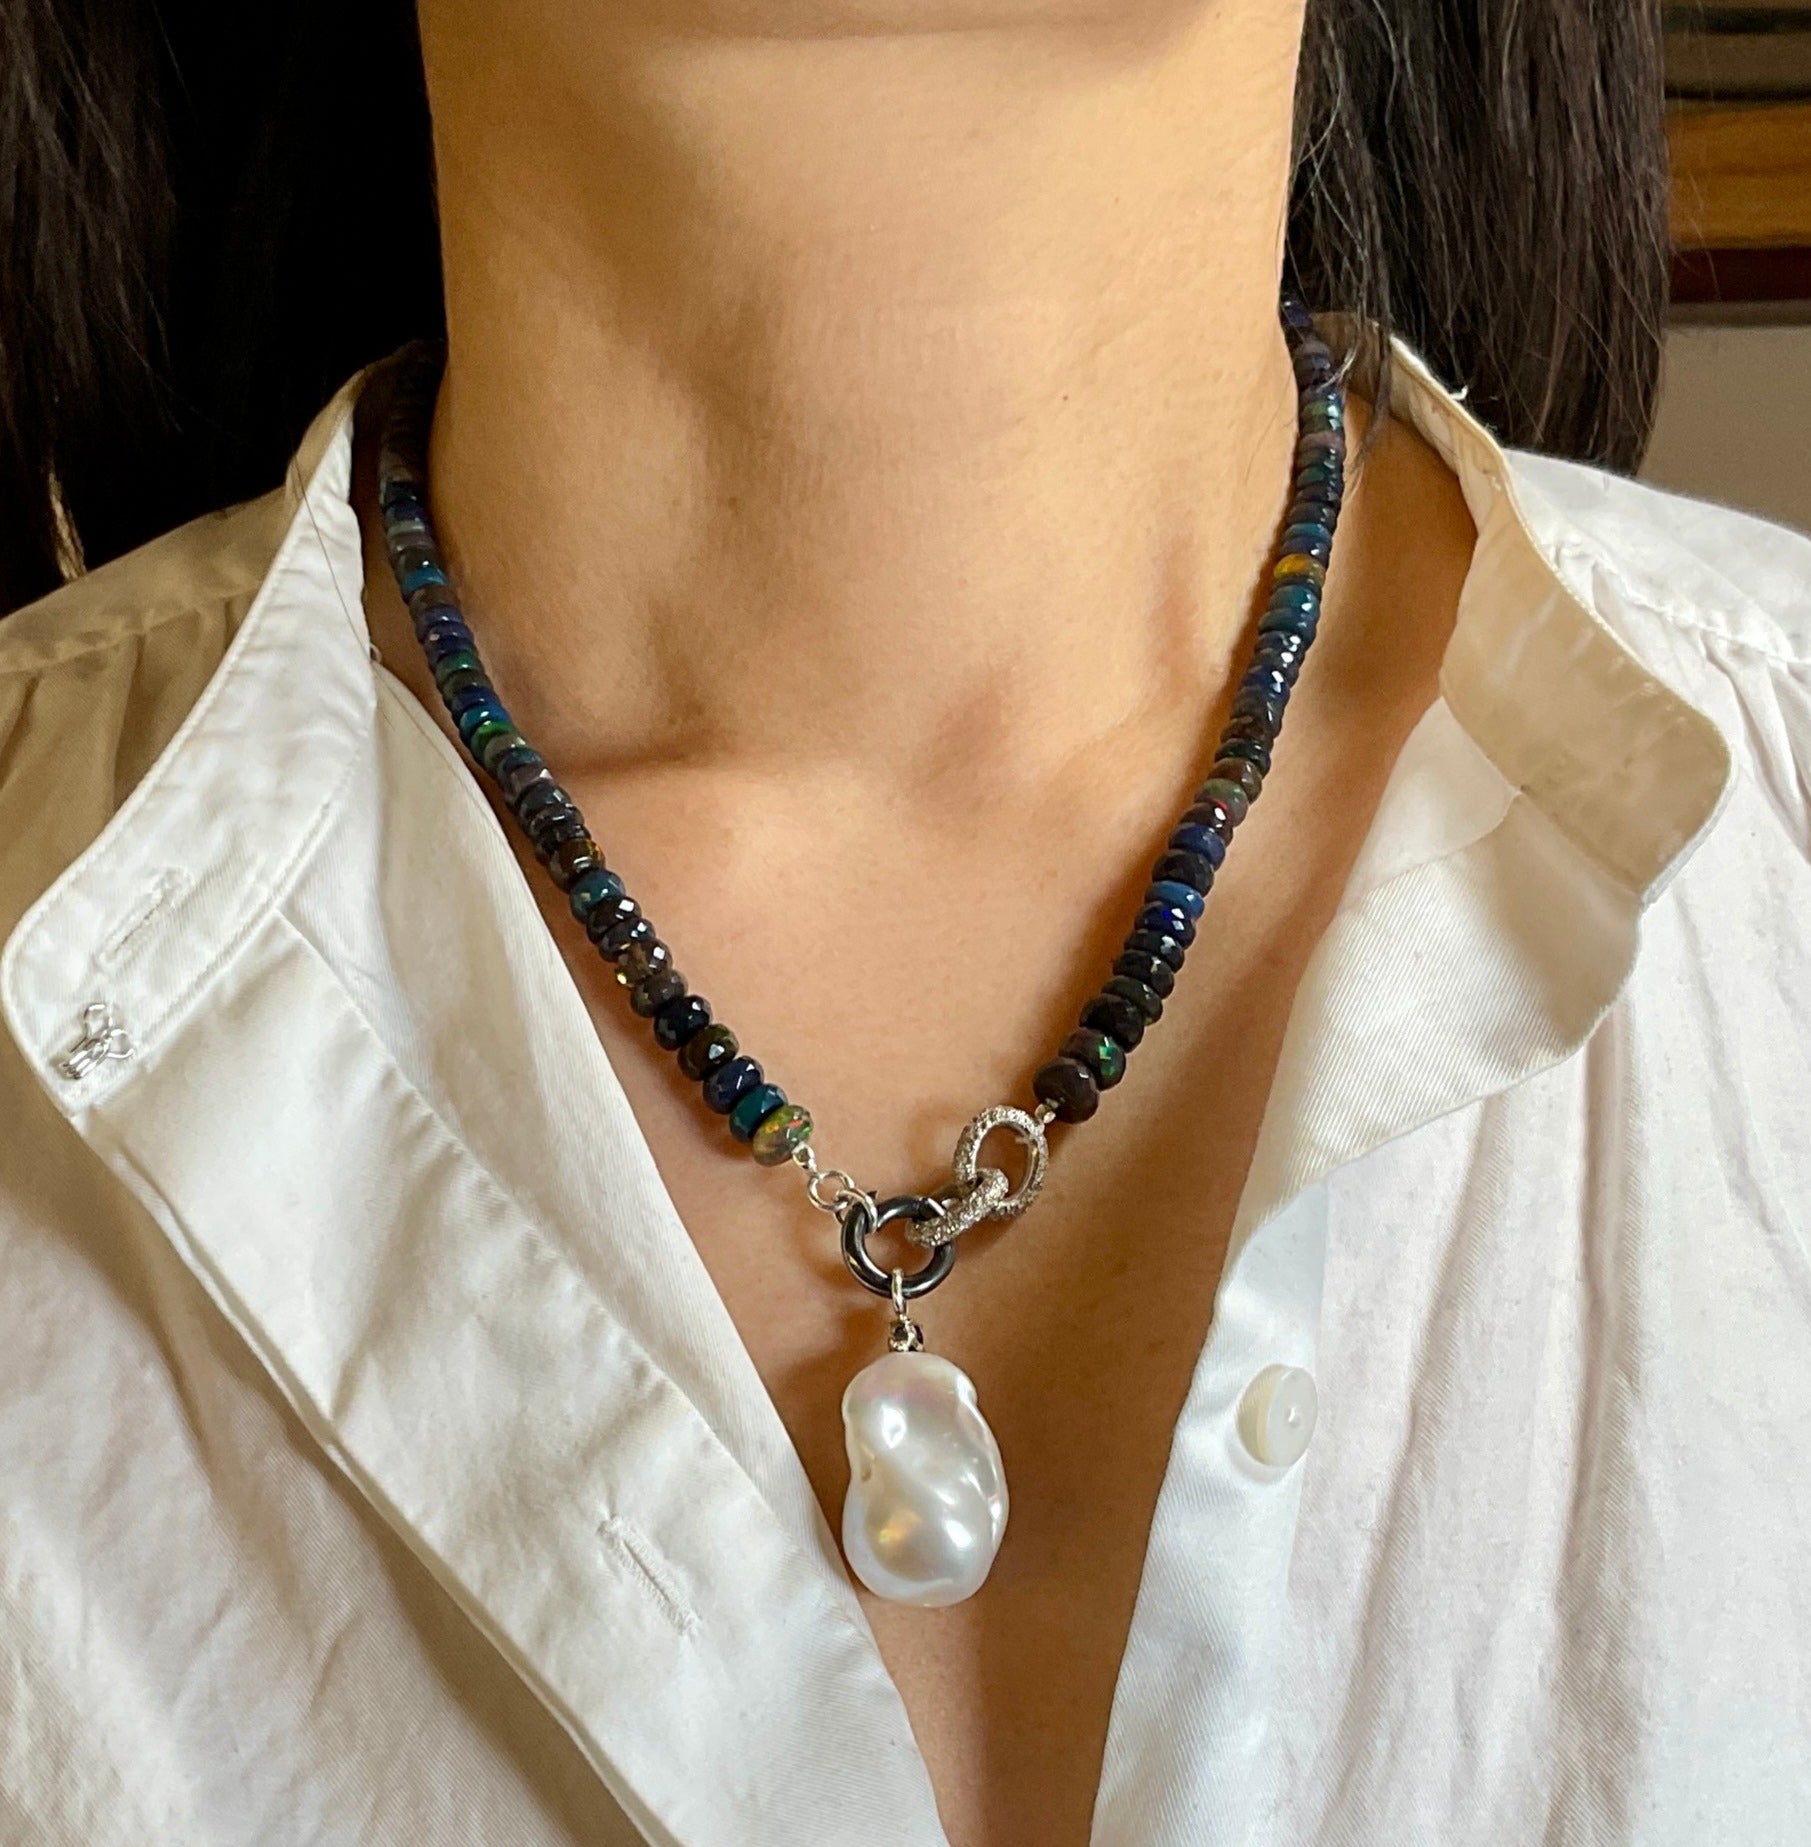 Australian Opal Necklace With Pearl Pendant